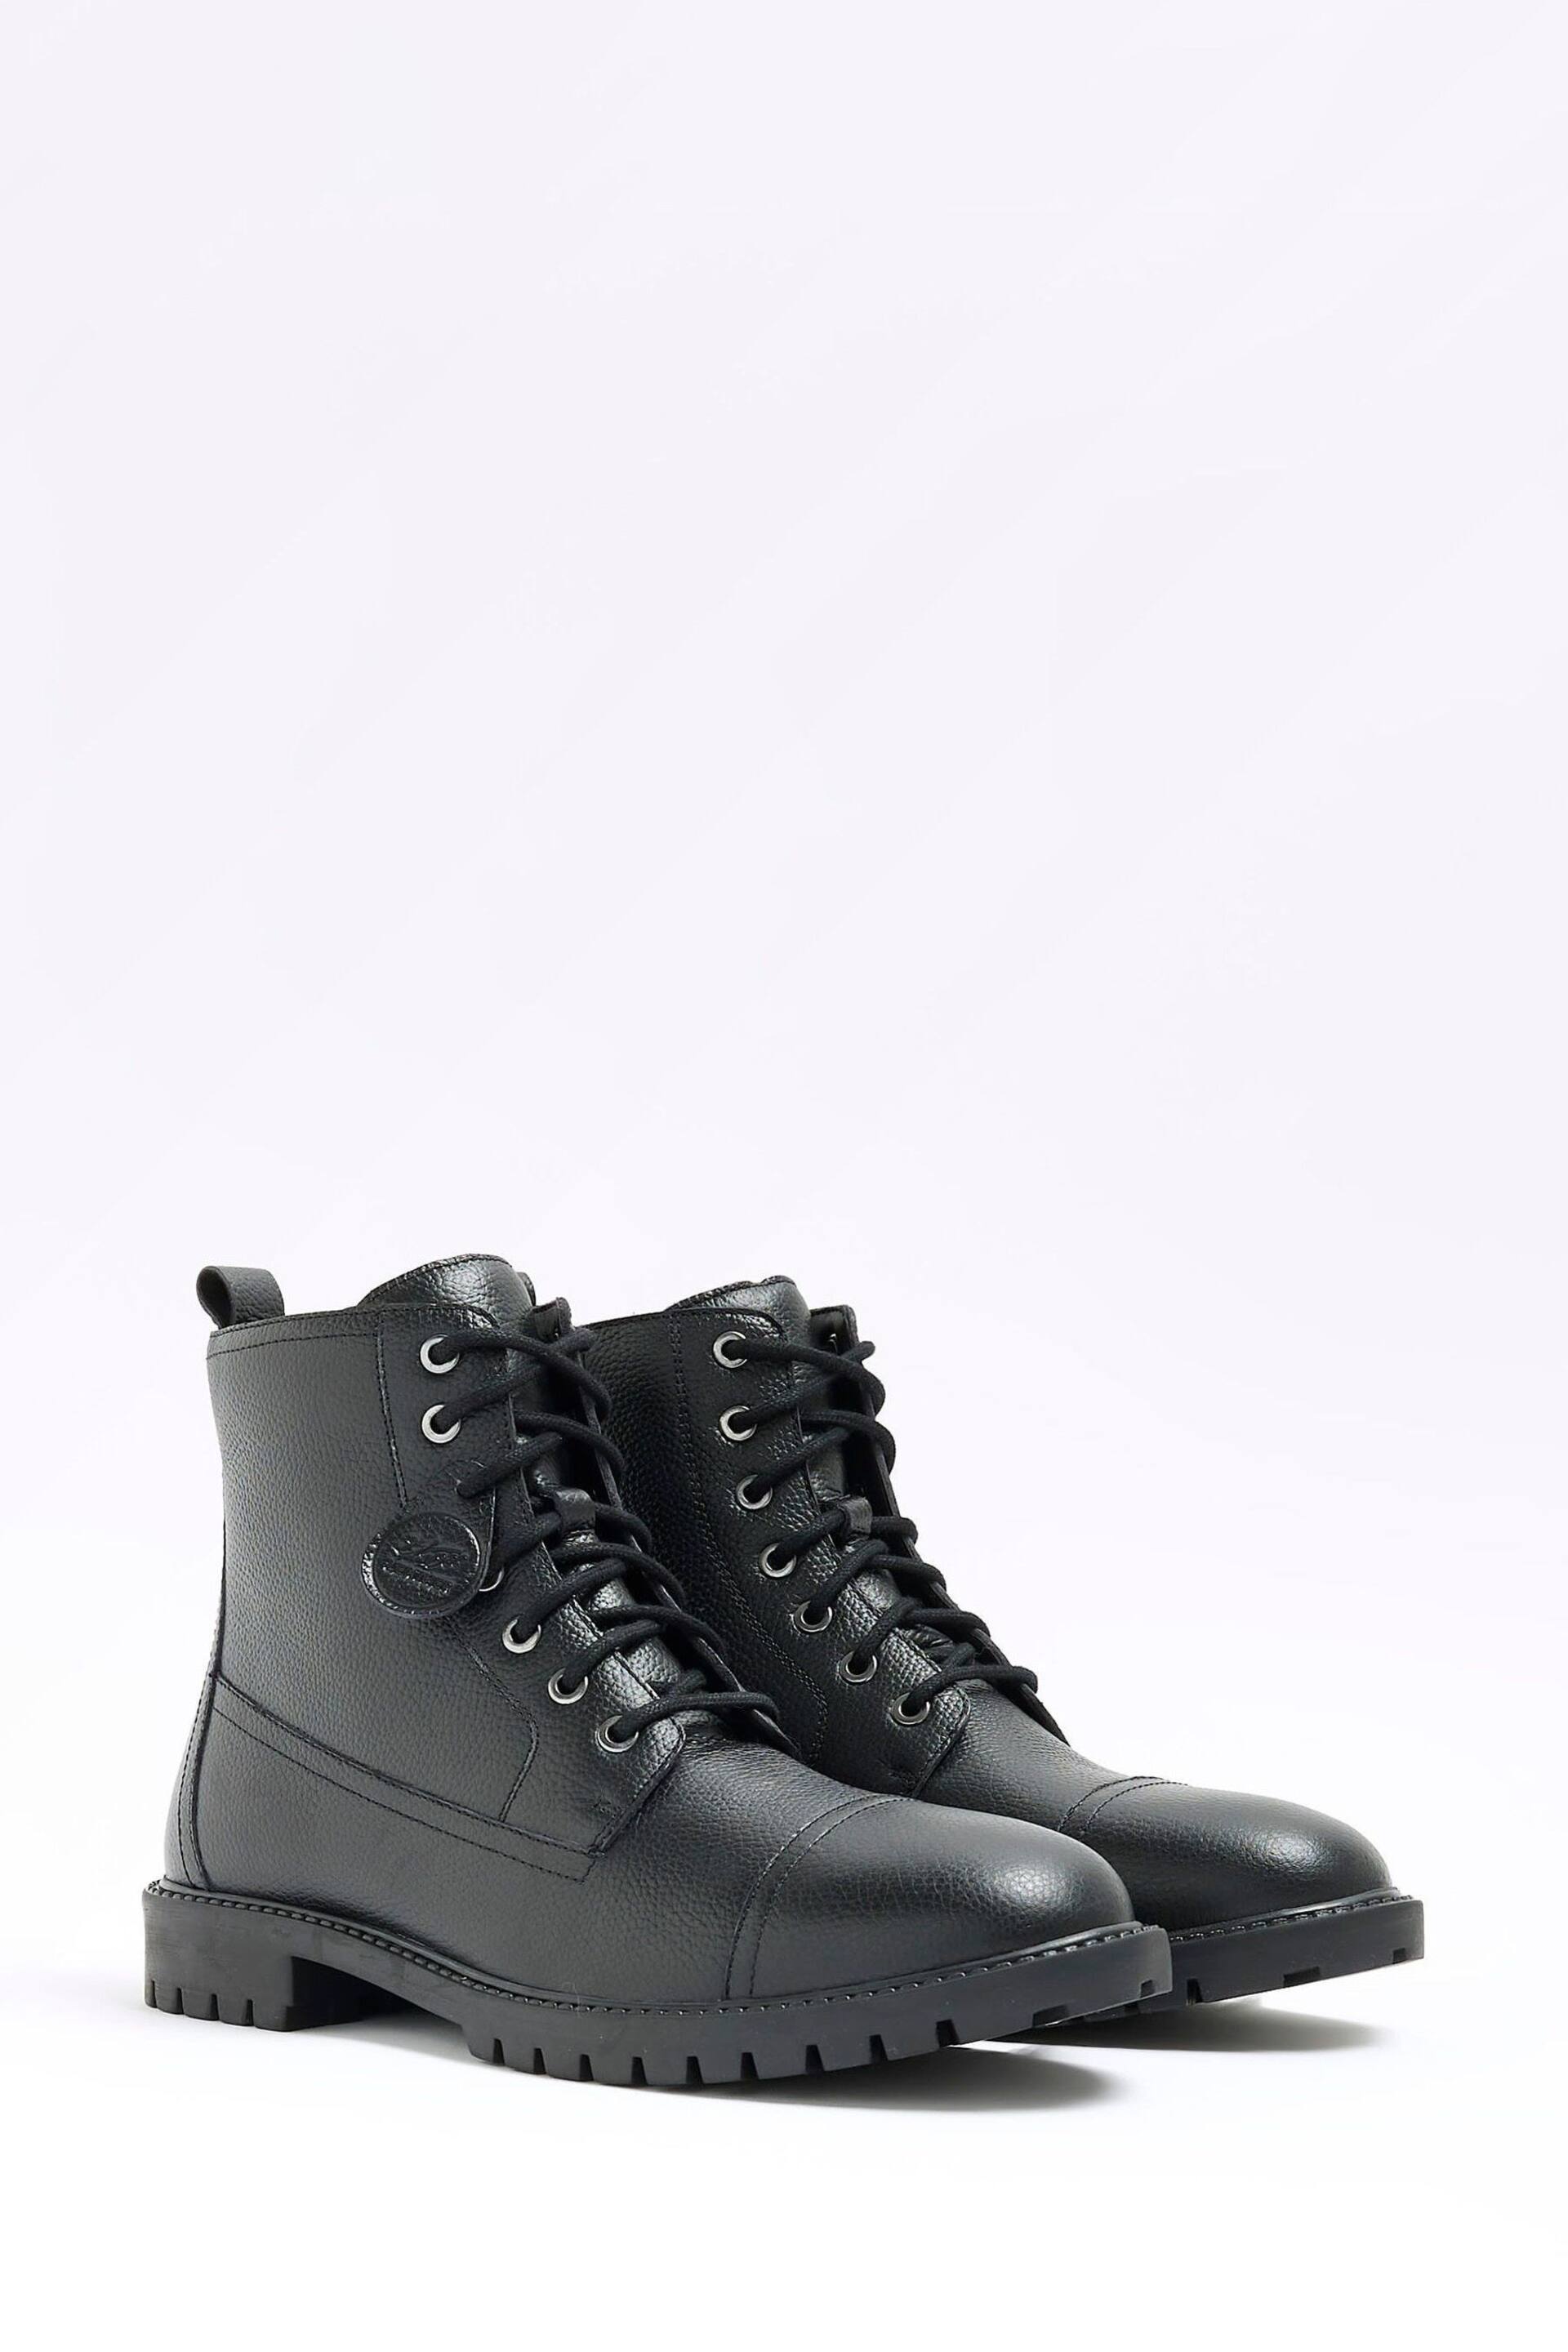 River Island Black Leather Leather Laced Combat Boots - Image 2 of 5